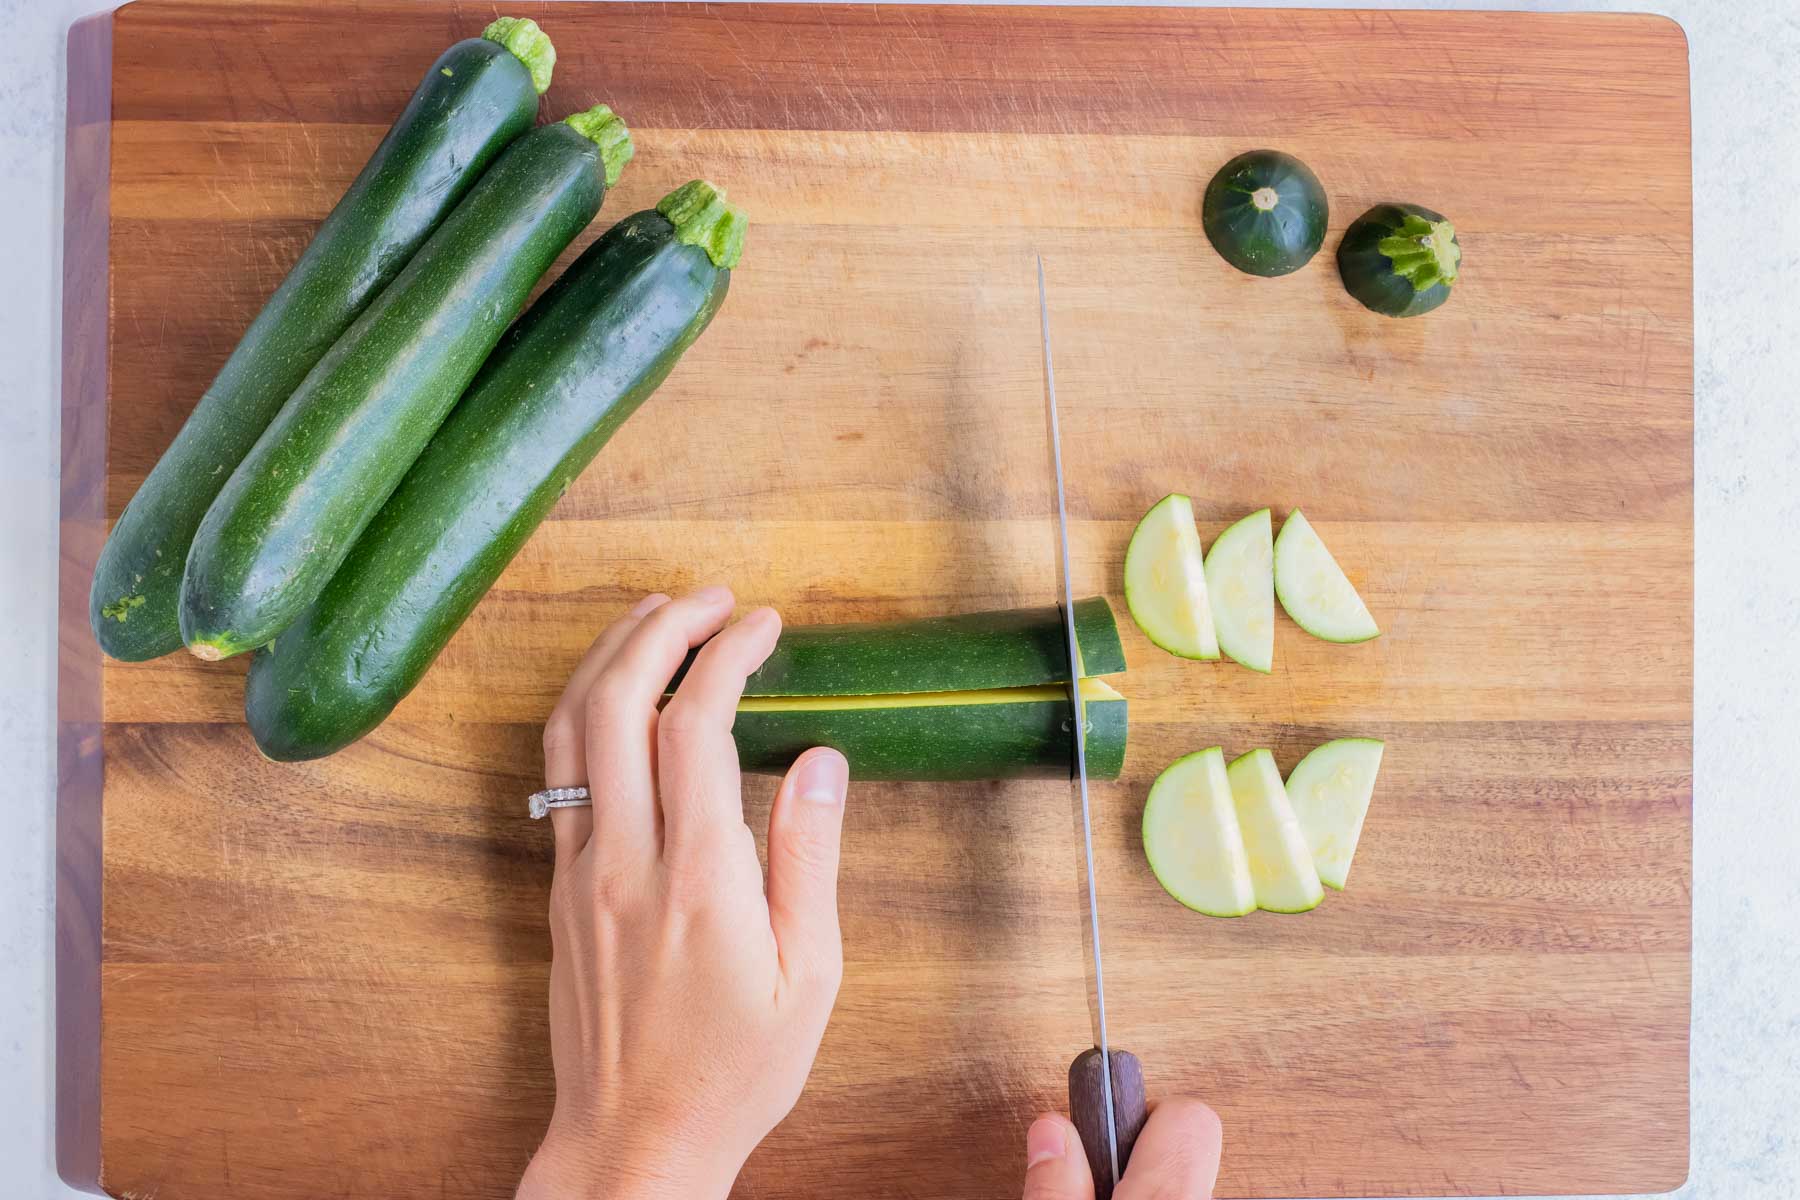 Zucchini is chopped on the cutting board.